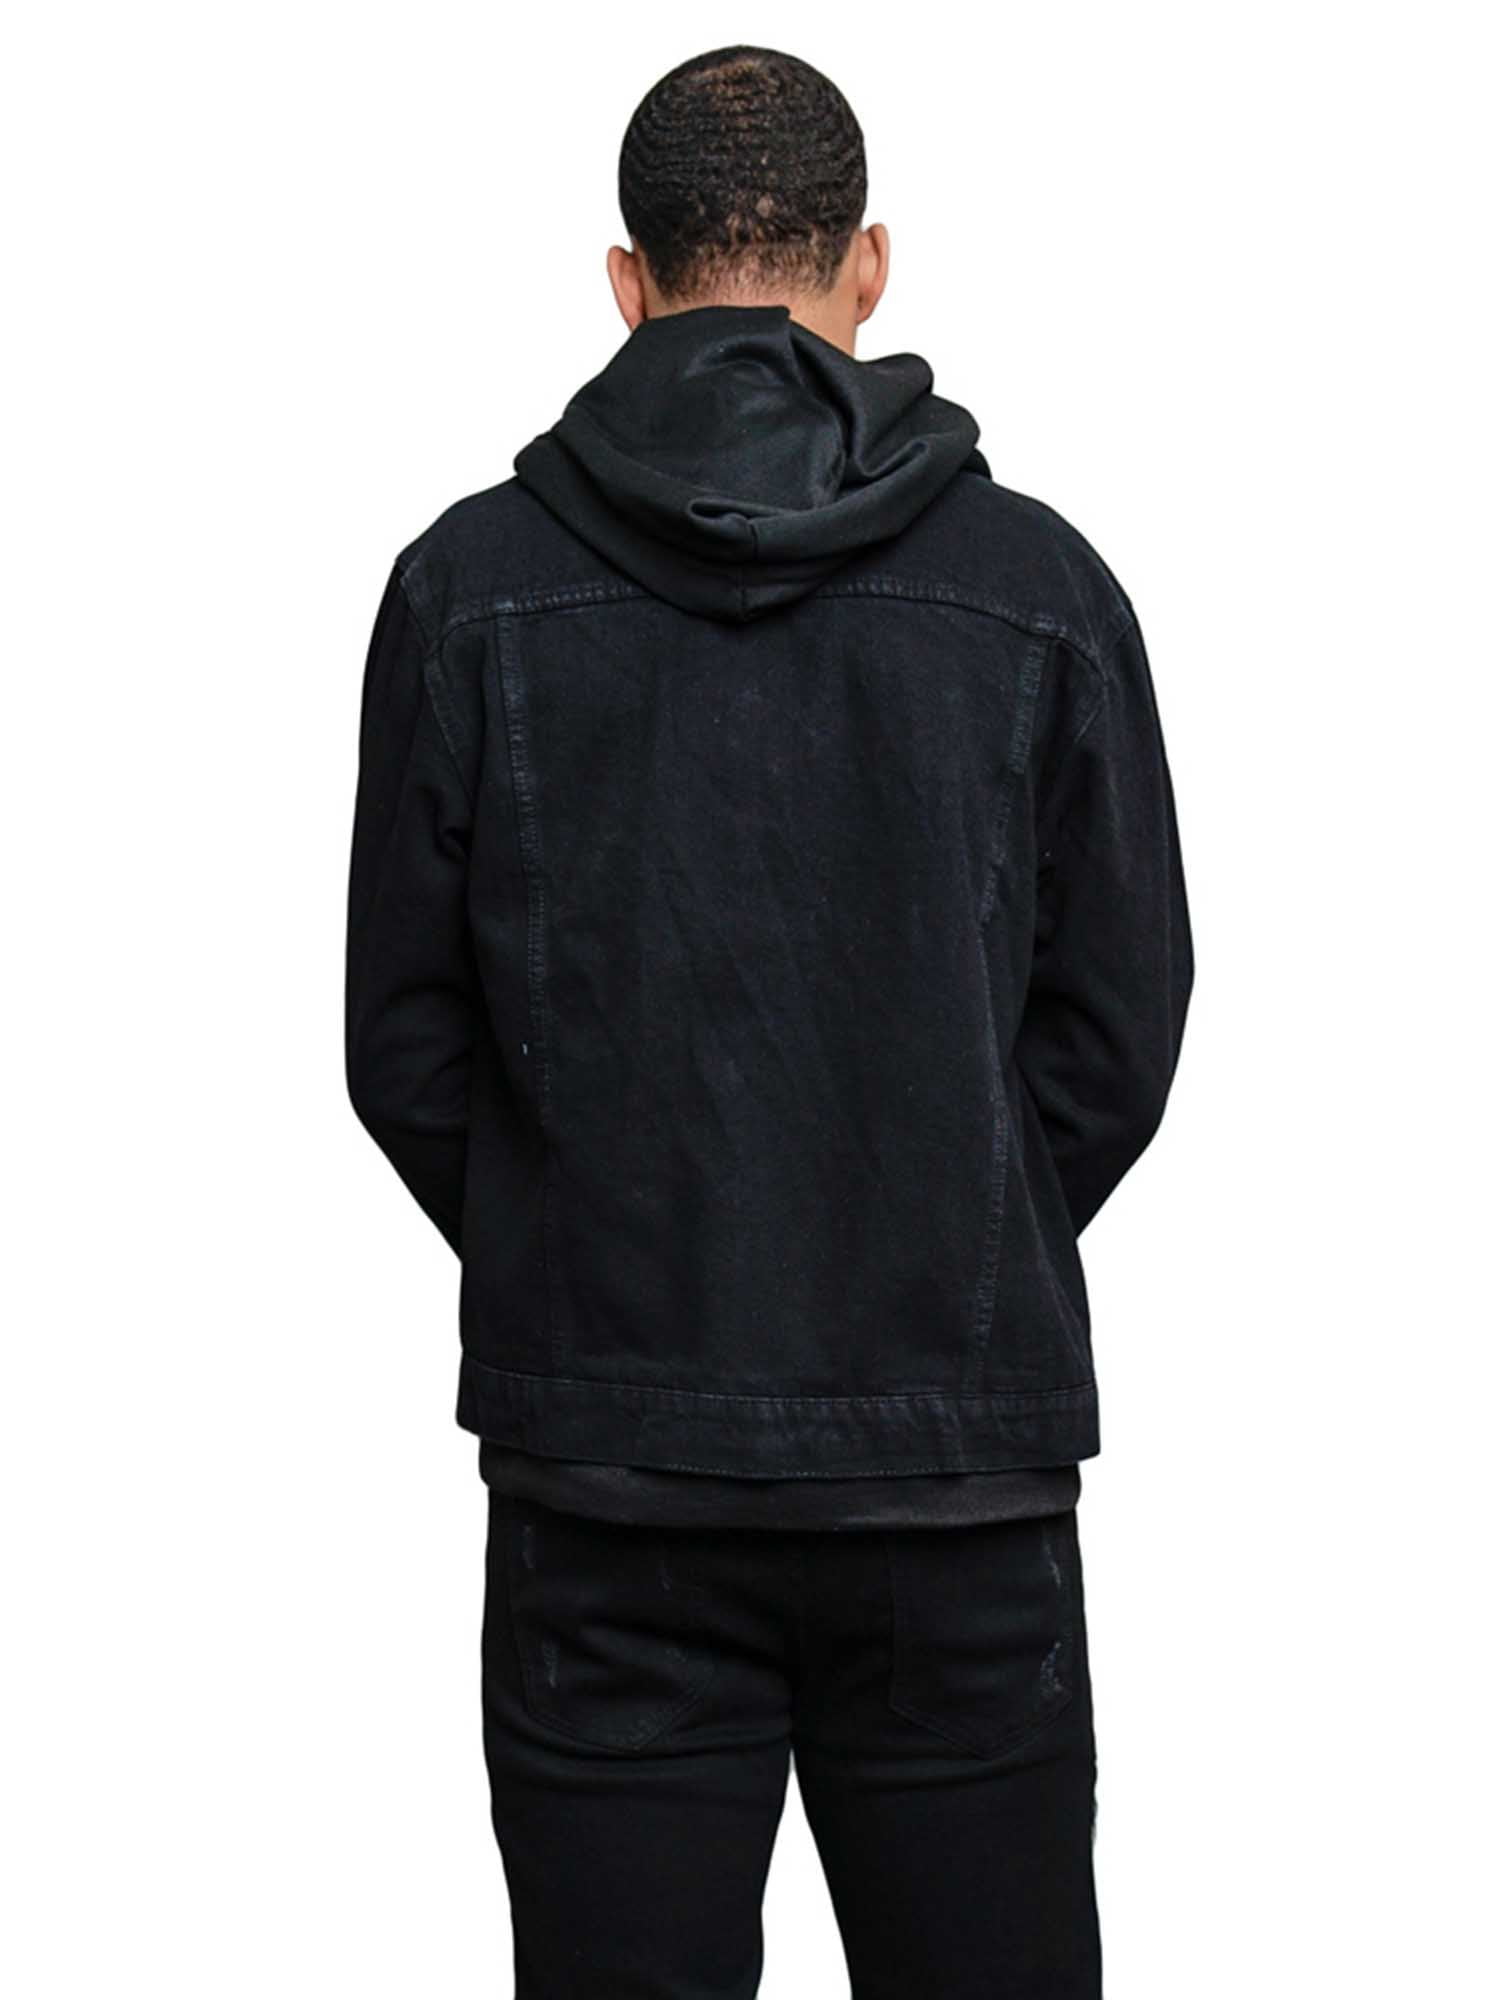 Victorious Men's Hoodie Layered Ripped Denim Jacket with Removable Hood  DK140 - Black - Small